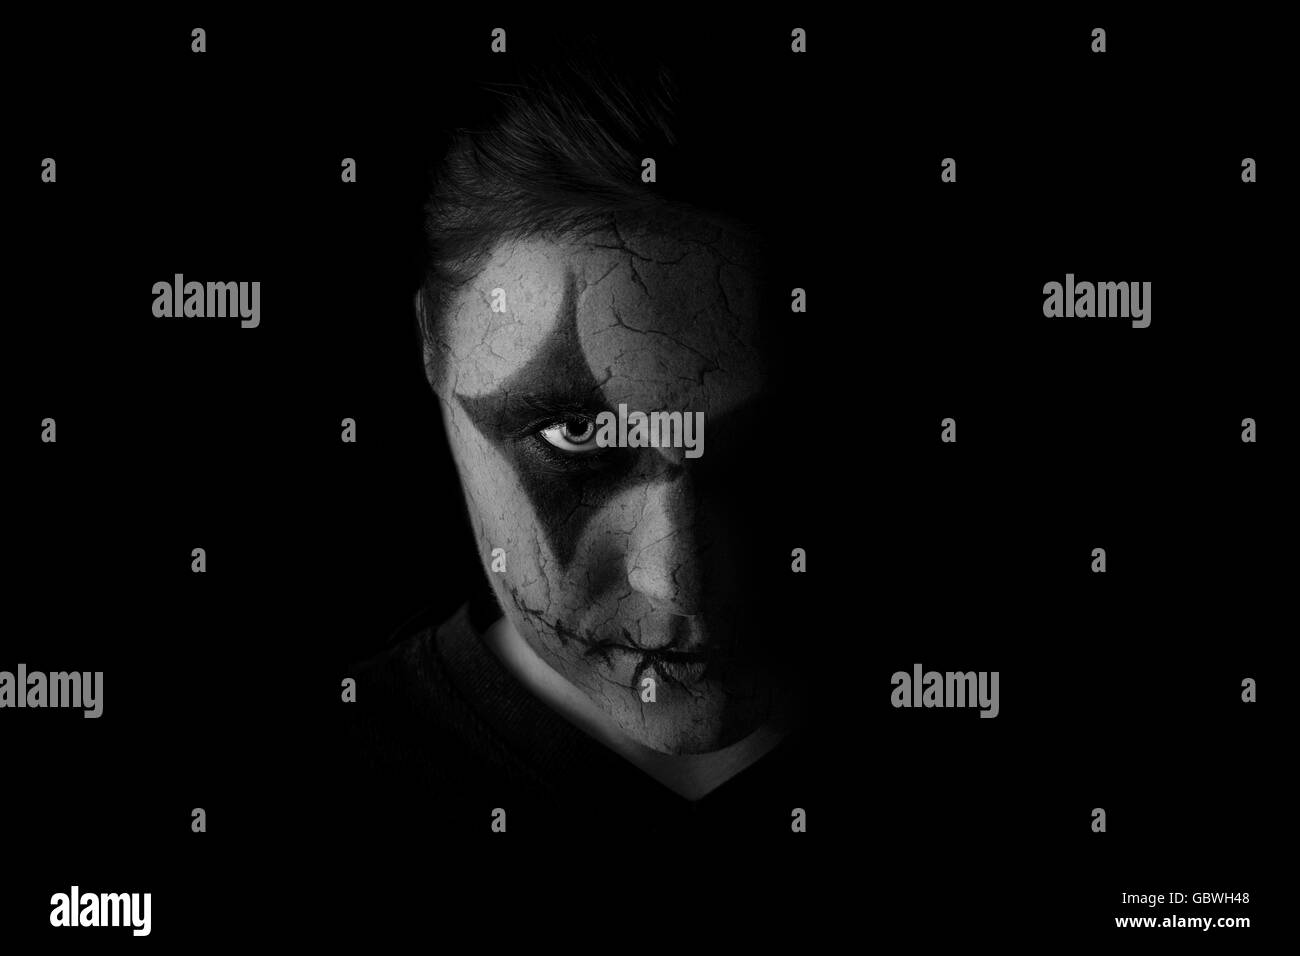 Half Face Photo of Man in Black Face Paint · Free Stock Photo